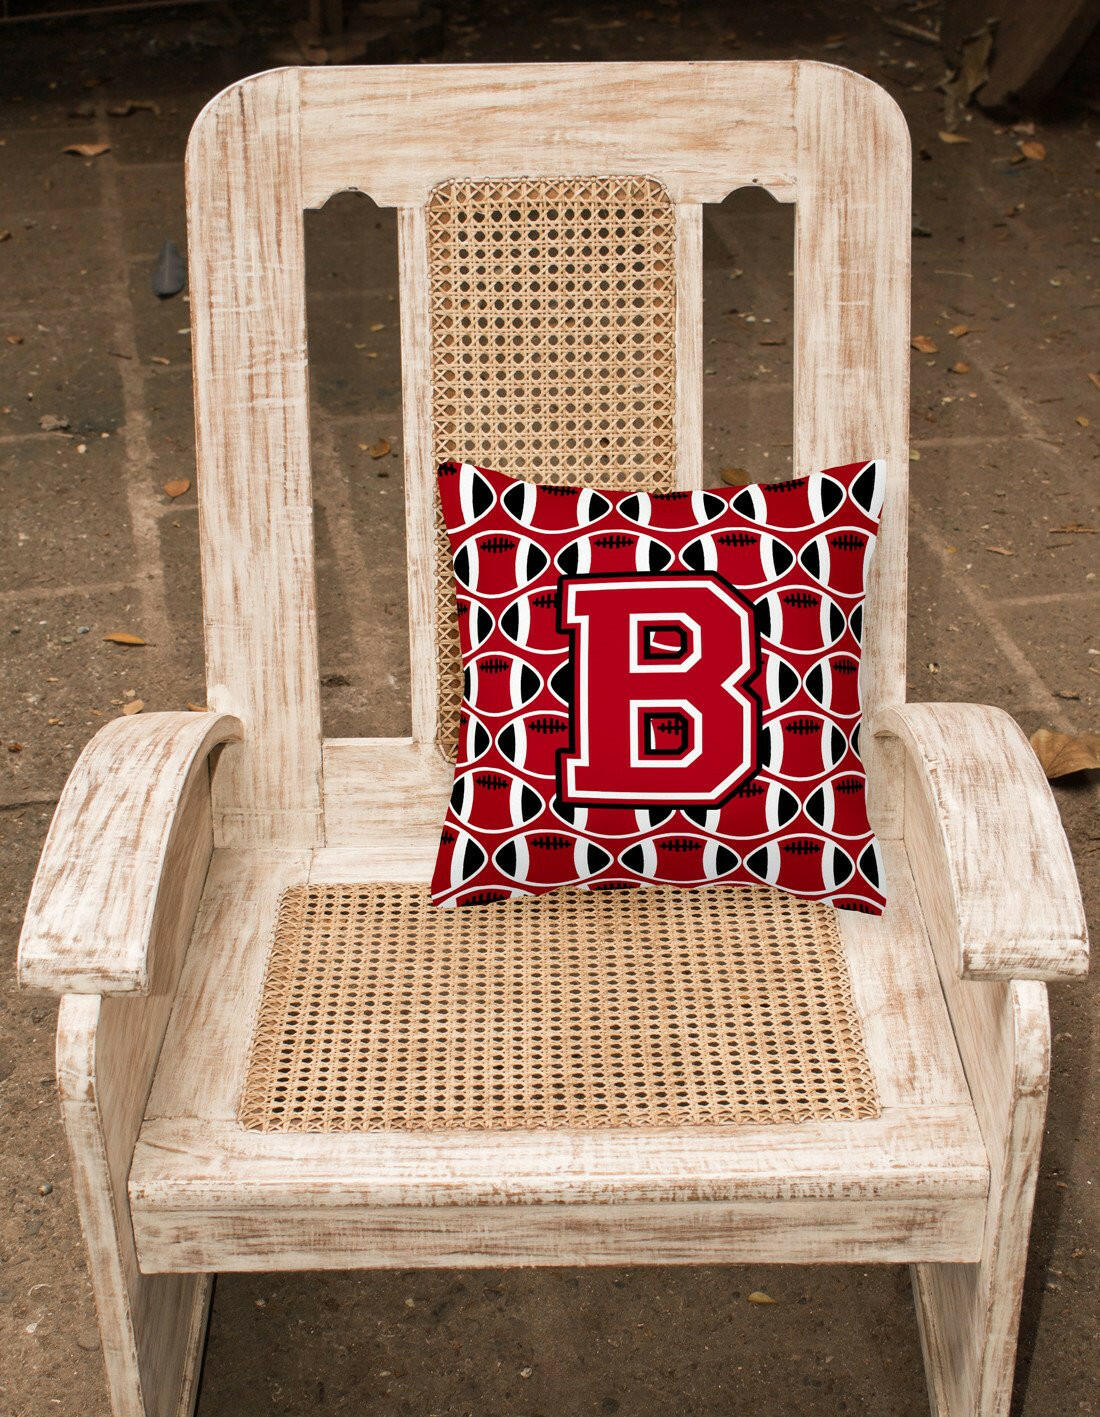 Letter B Football Red, Black and White Fabric Decorative Pillow CJ1073-BPW1414 by Caroline's Treasures